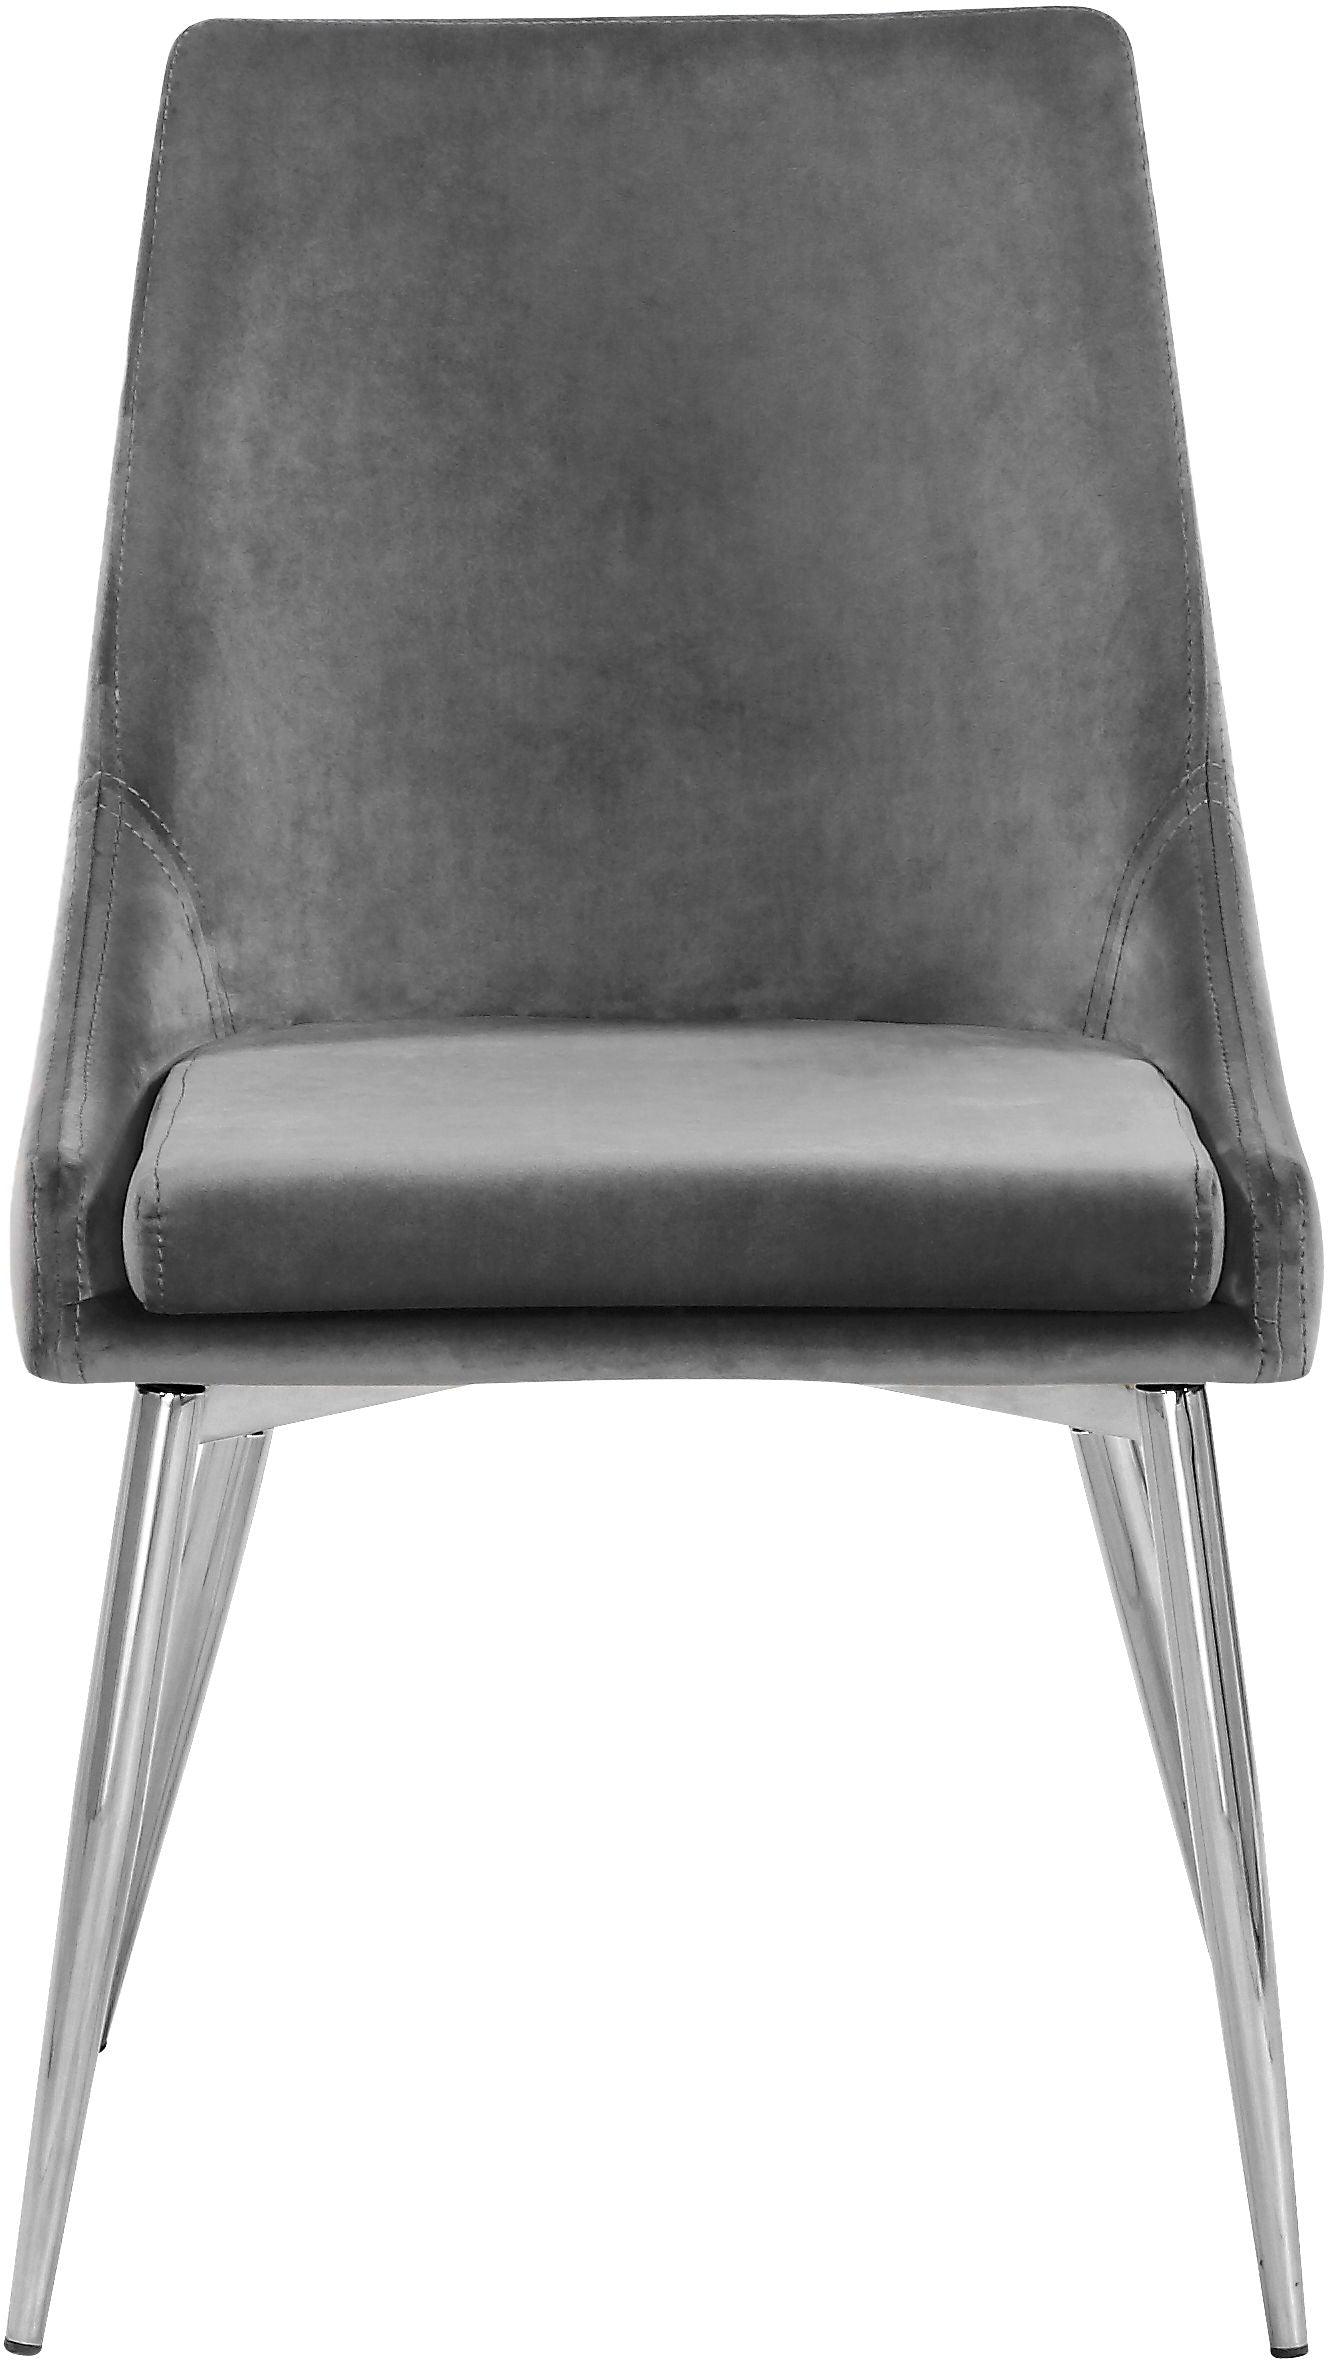 Meridian Furniture - Karina - Dining Chair with Chrome Legs (Set of 2) - 5th Avenue Furniture